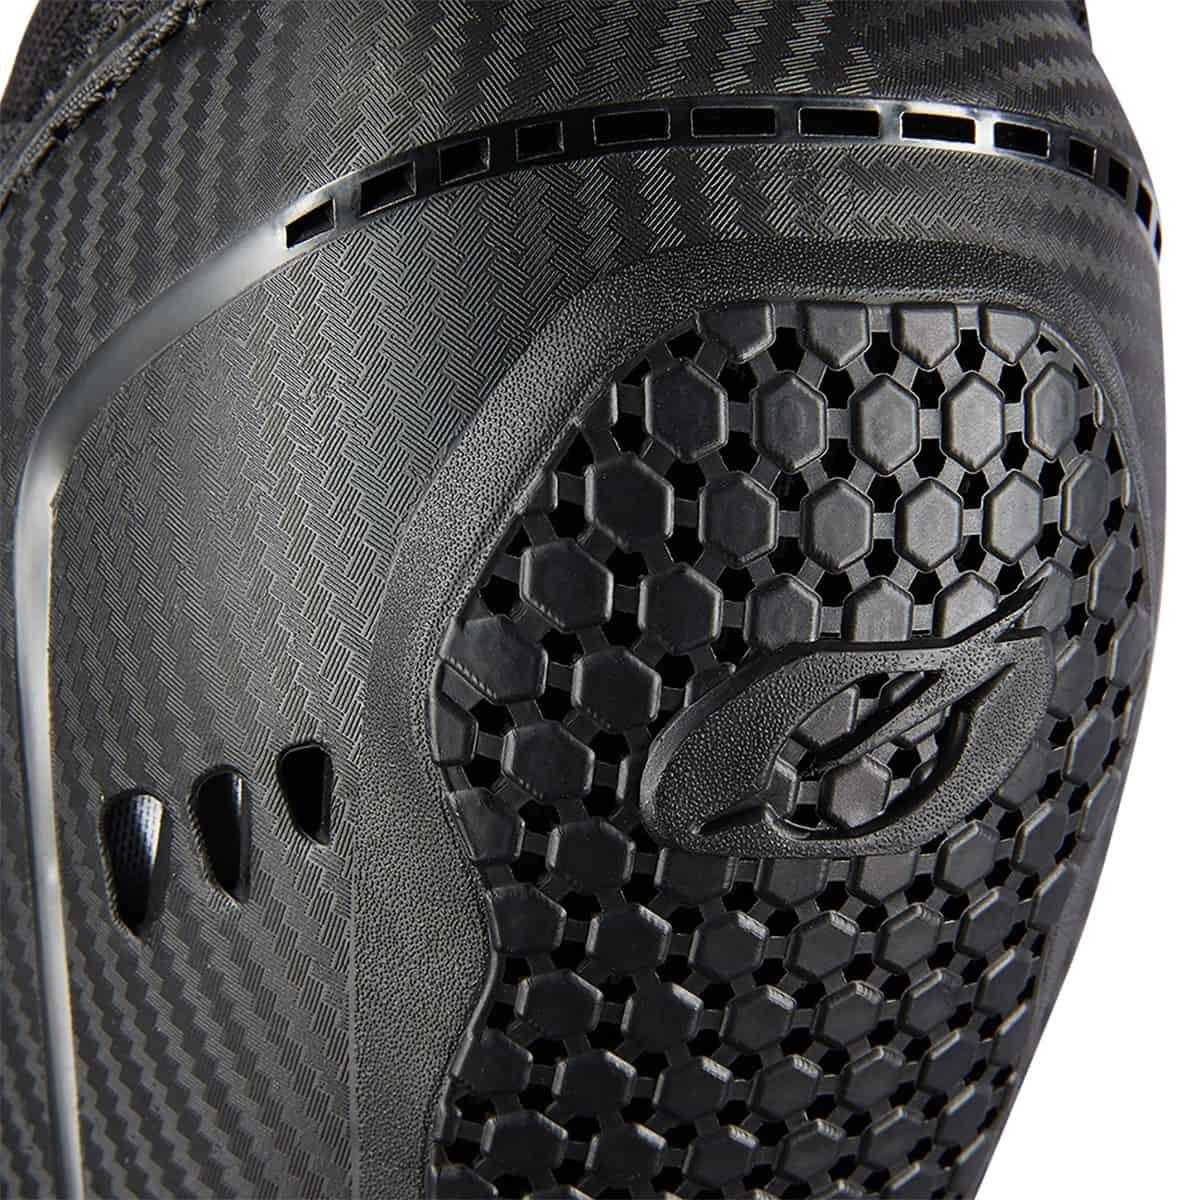 Comfortable elbow armour which takes care of impact protection when riding off road-5